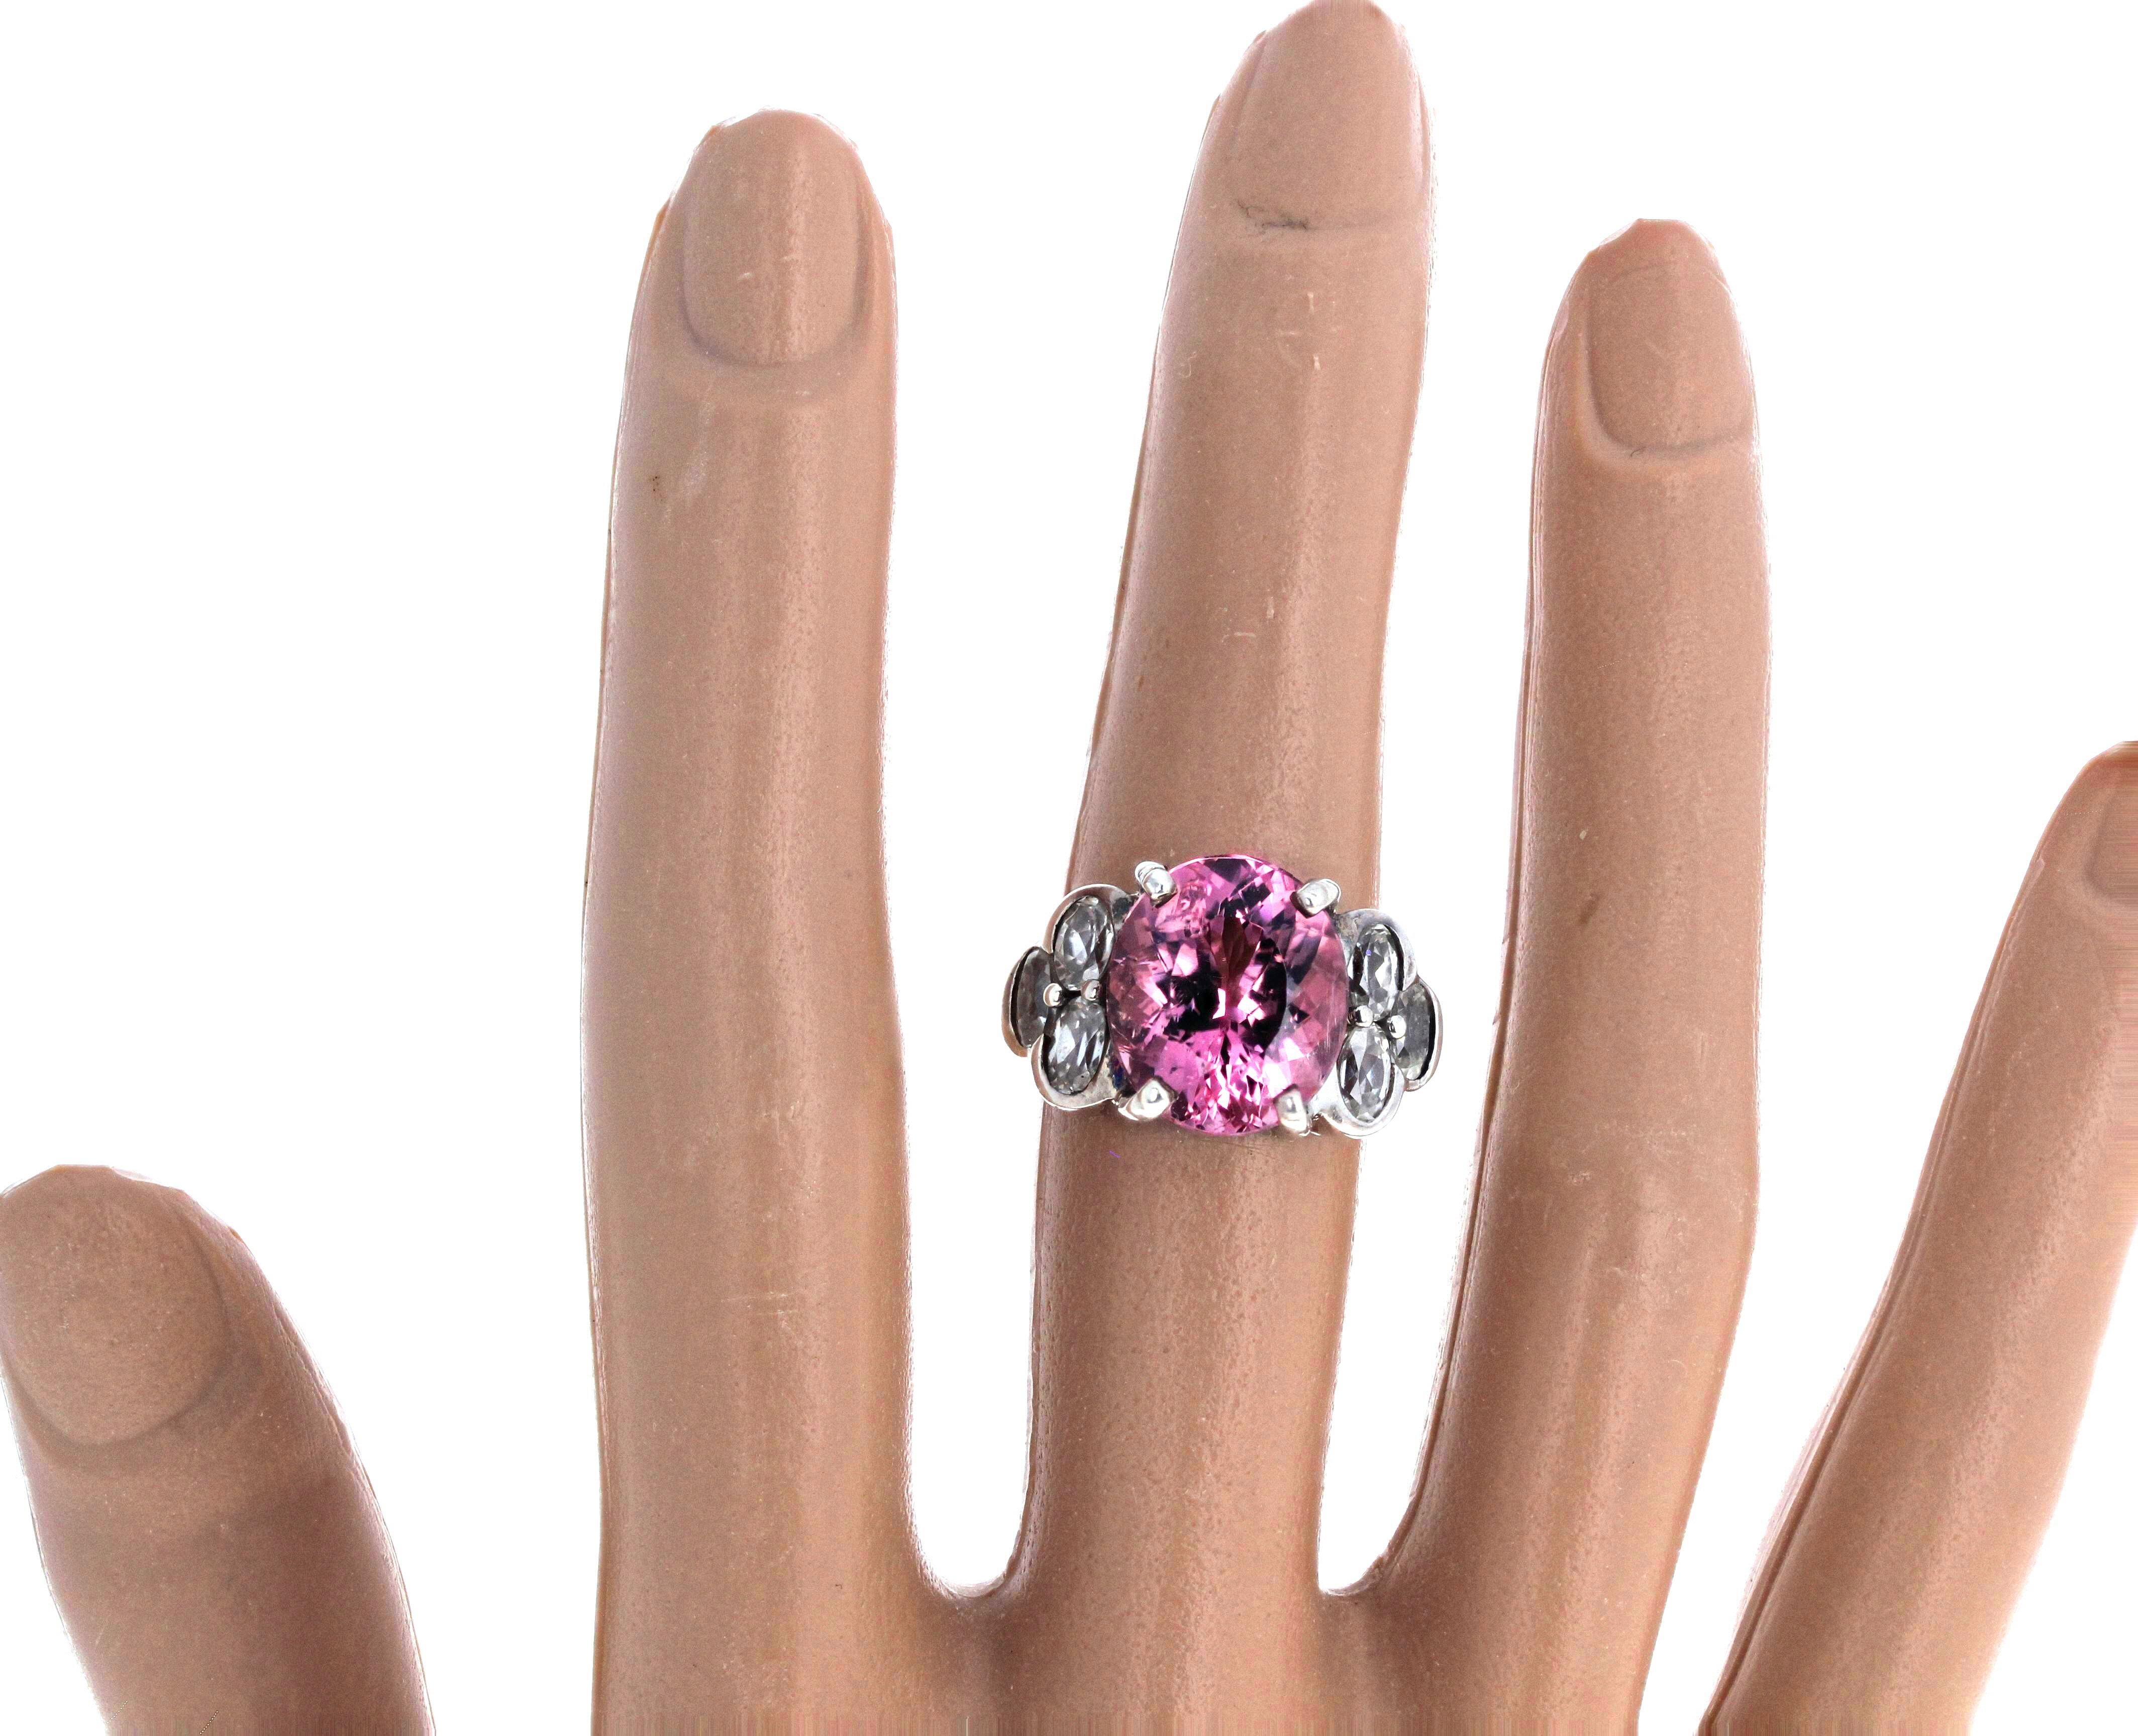 AJD Beautiful 4 Cts Sparkling Pink Tourmaline & Silver Quartz Silver Ring For Sale 2